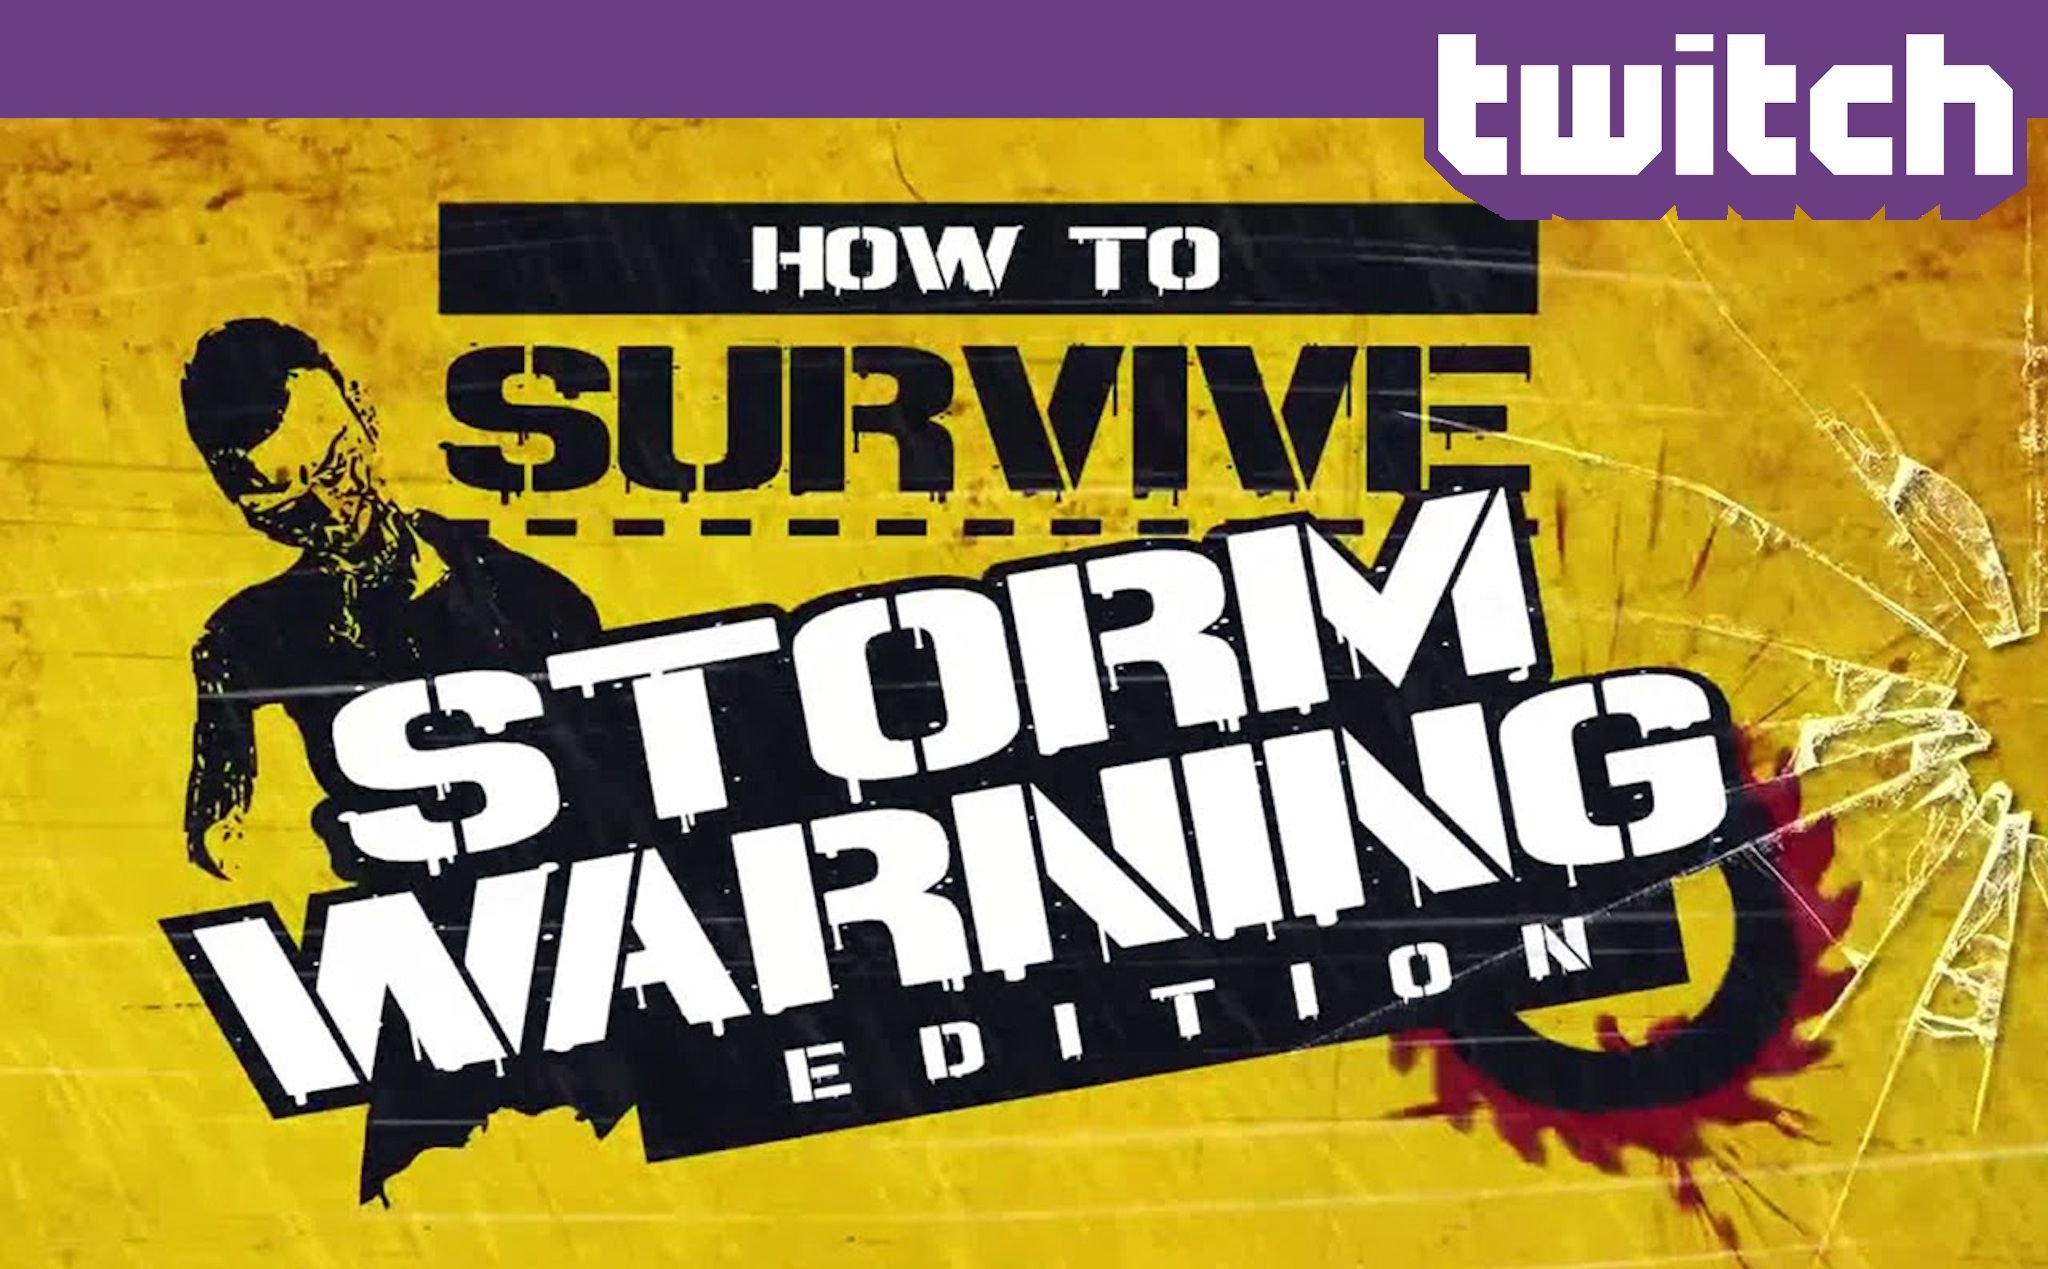 Watch and win as we play How to Survive: Storm Warning Edition tonight on Twitch